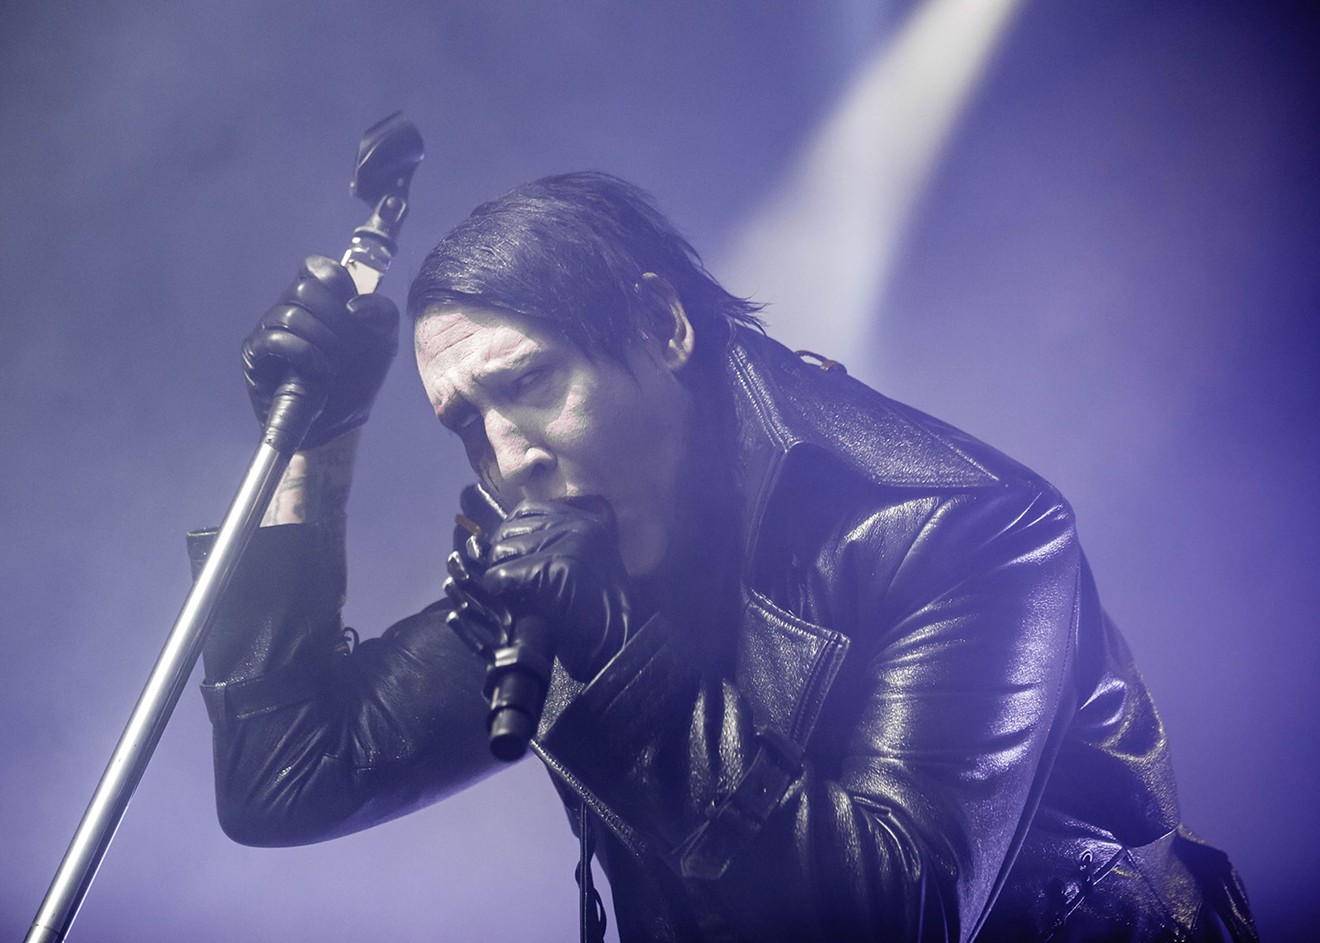 Marilyn Manson performed at the Fillmore Auditorium on January 20.